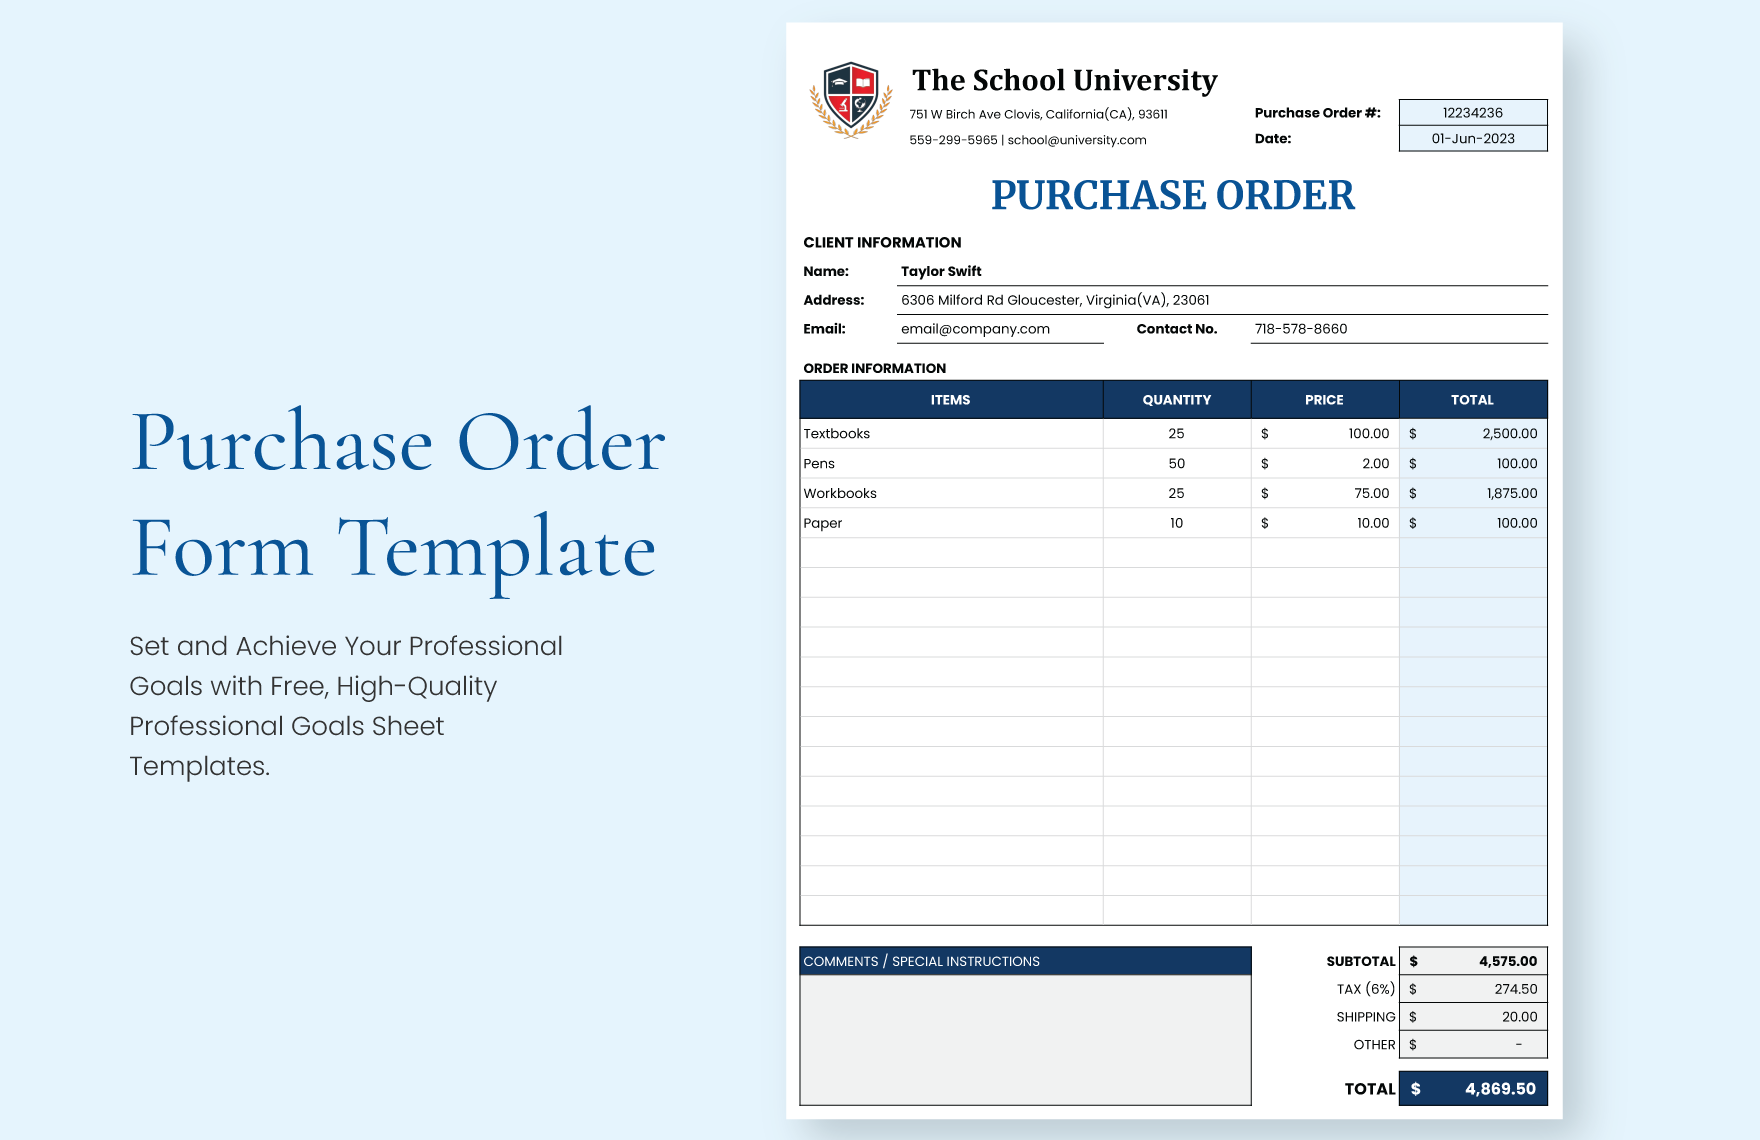 Purchase Order Form Template - Download in Excel, Google Sheets ...